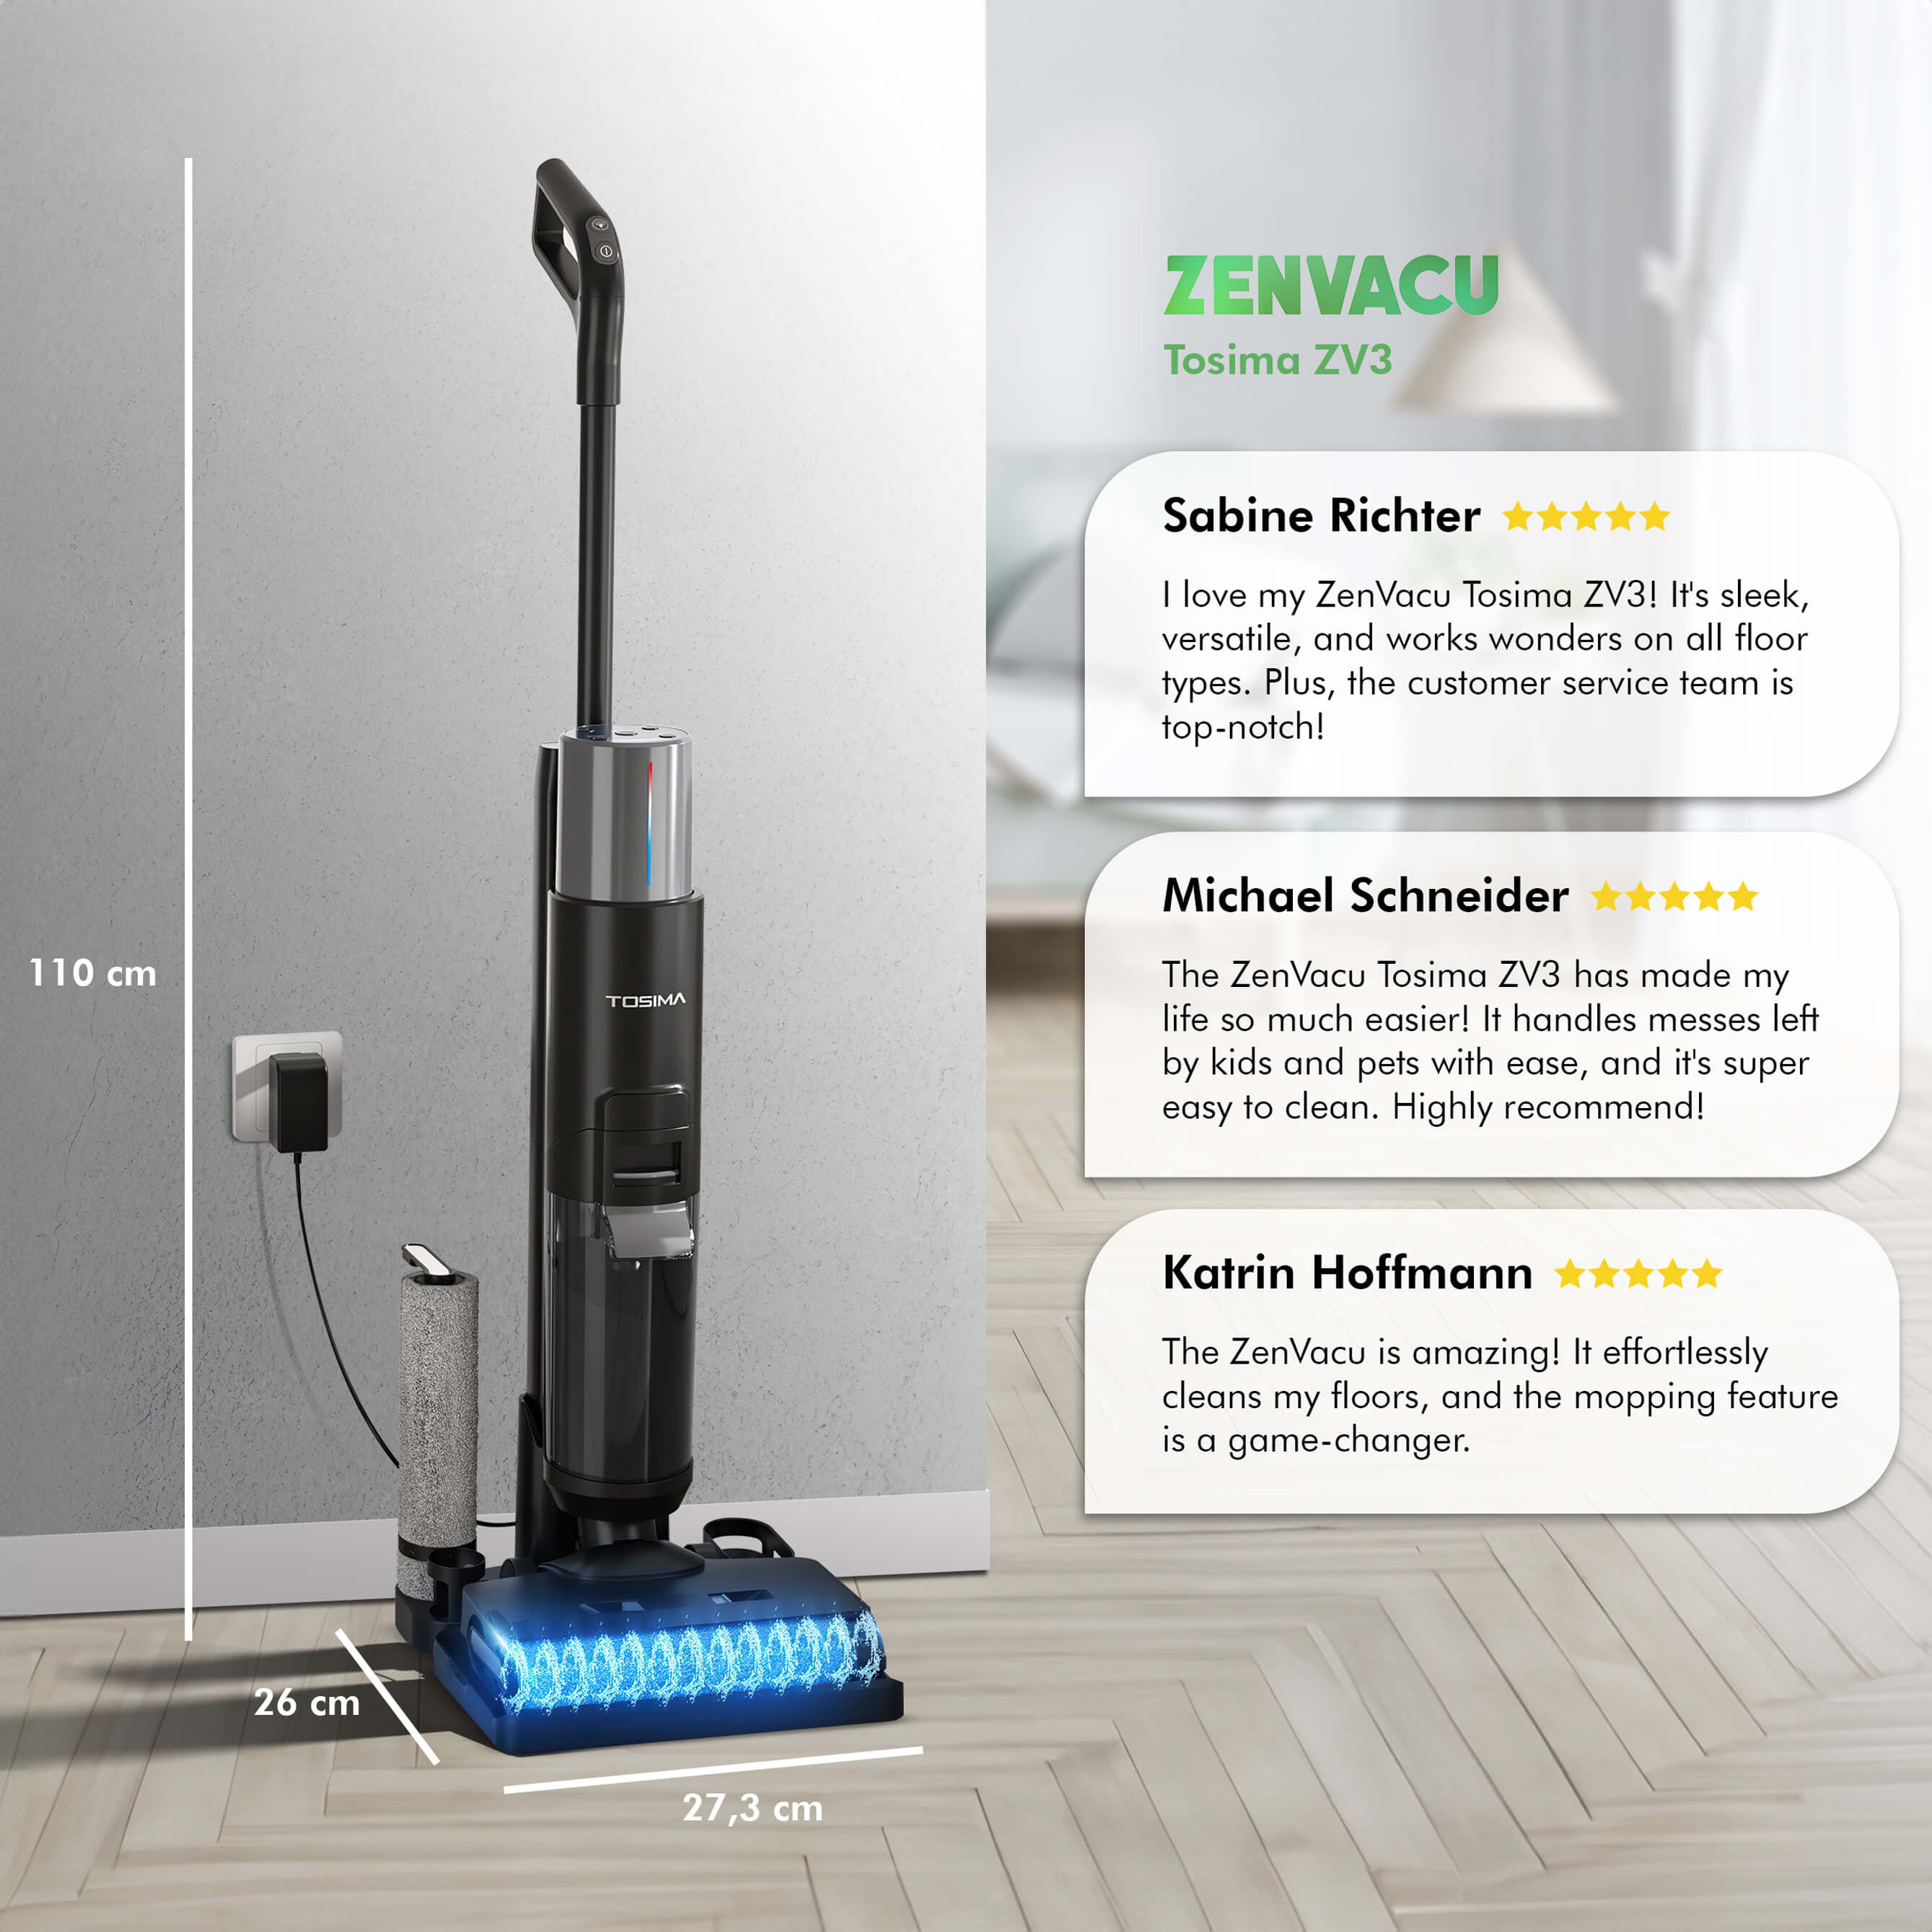 Explore the Ultimate ZenVacu Wet and Dry Vacuum Line-up, Available in Various Impressive Sizes, Flawlessly Illustrated Alongside a Spectacular Array of Perfect 5-Star Customer Reviews Celebrating Its Unmatched Cleaning Power and Reliability.